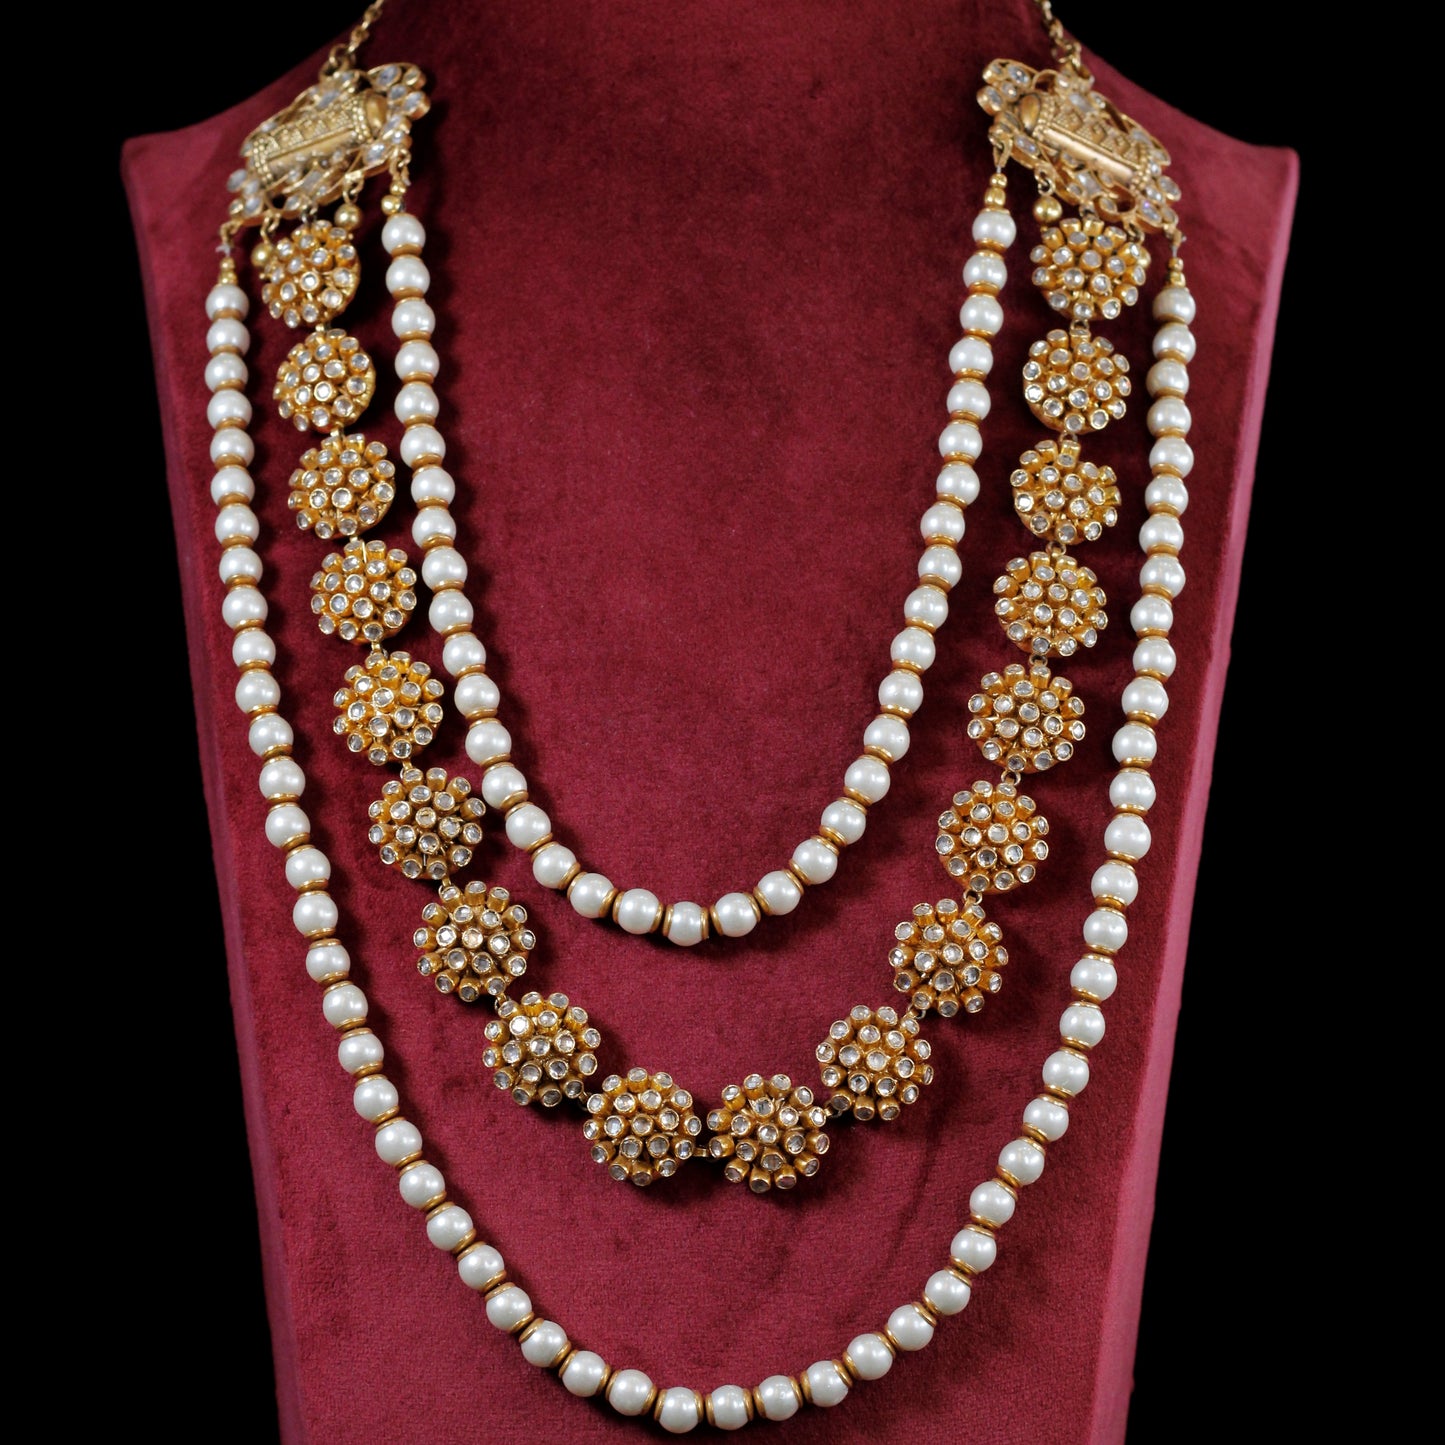 NECKLACE- 92.5 STERLING SILVER GOLD PLATED, KUNDAN stones WITH FRESH WATER PEARLS.